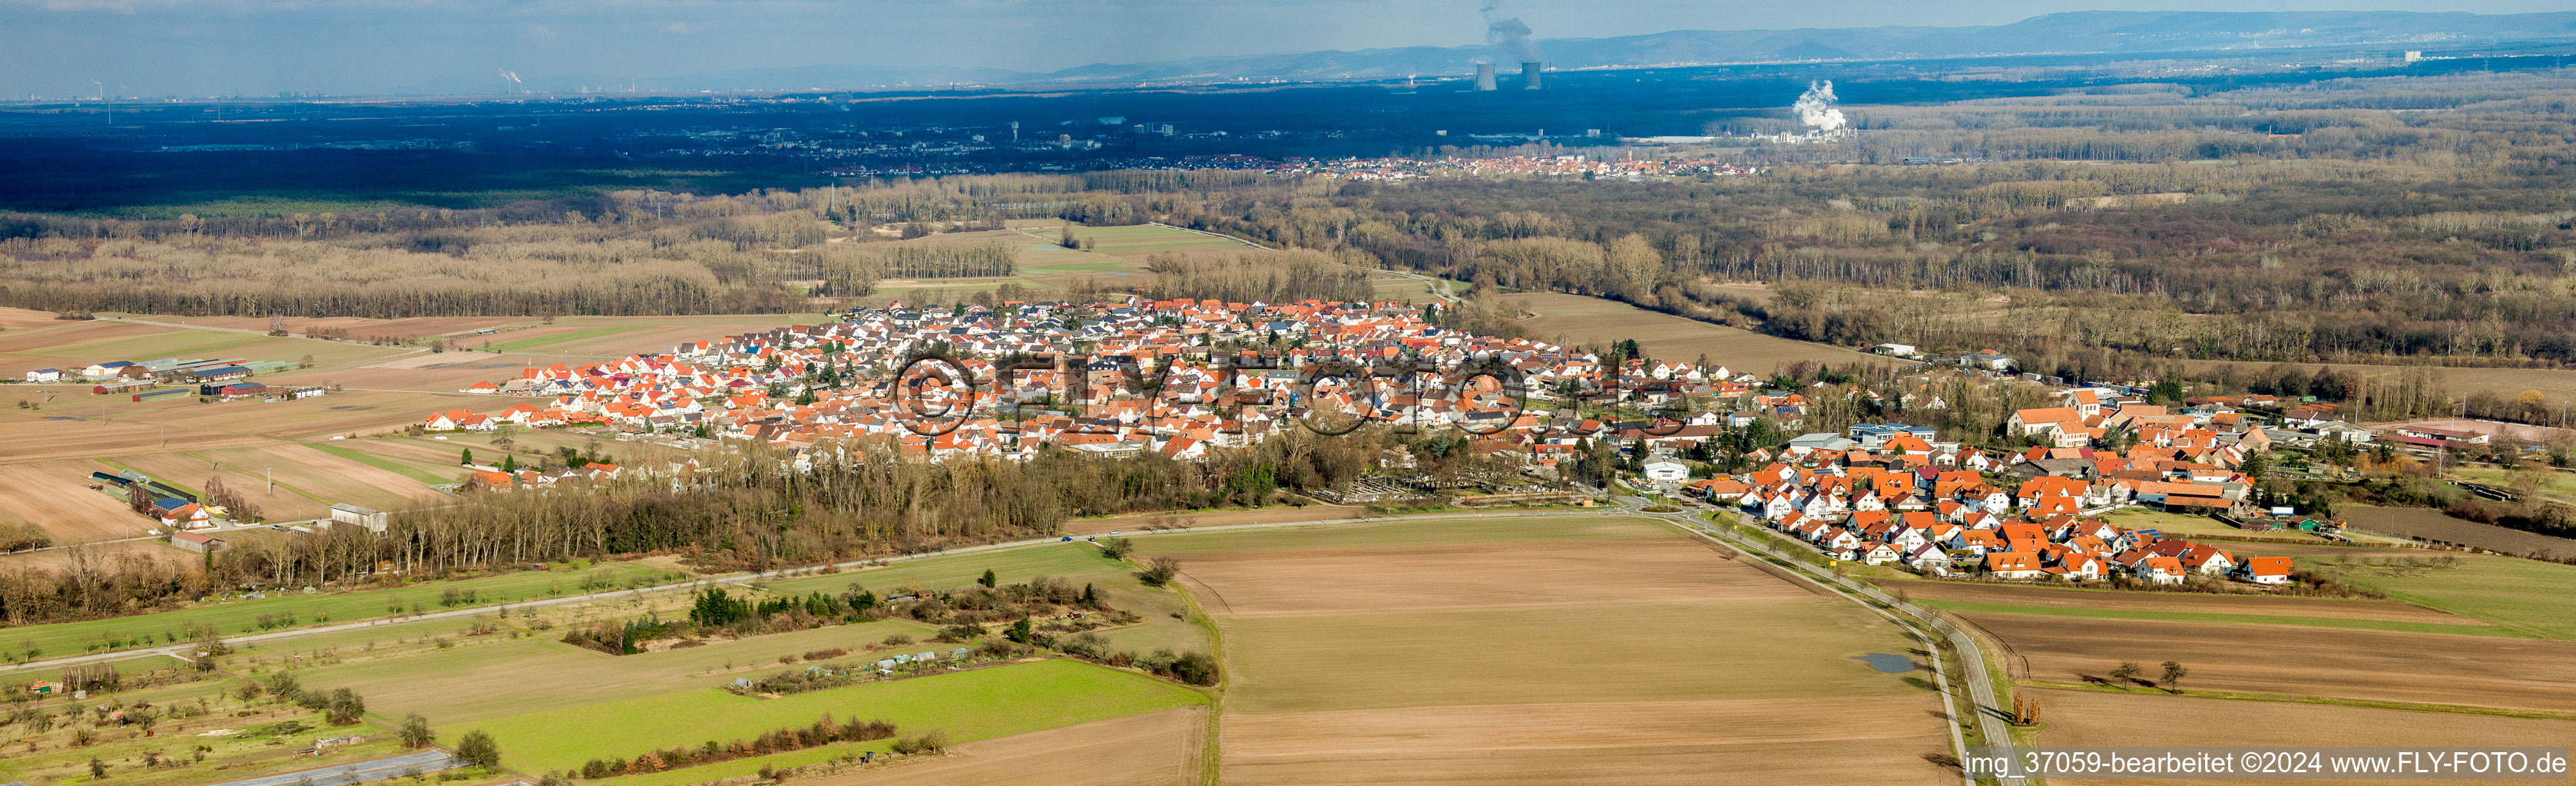 Panoramic perspective of Village - view on the edge of agricultural fields and farmland in Hoerdt in the state Rhineland-Palatinate, Germany